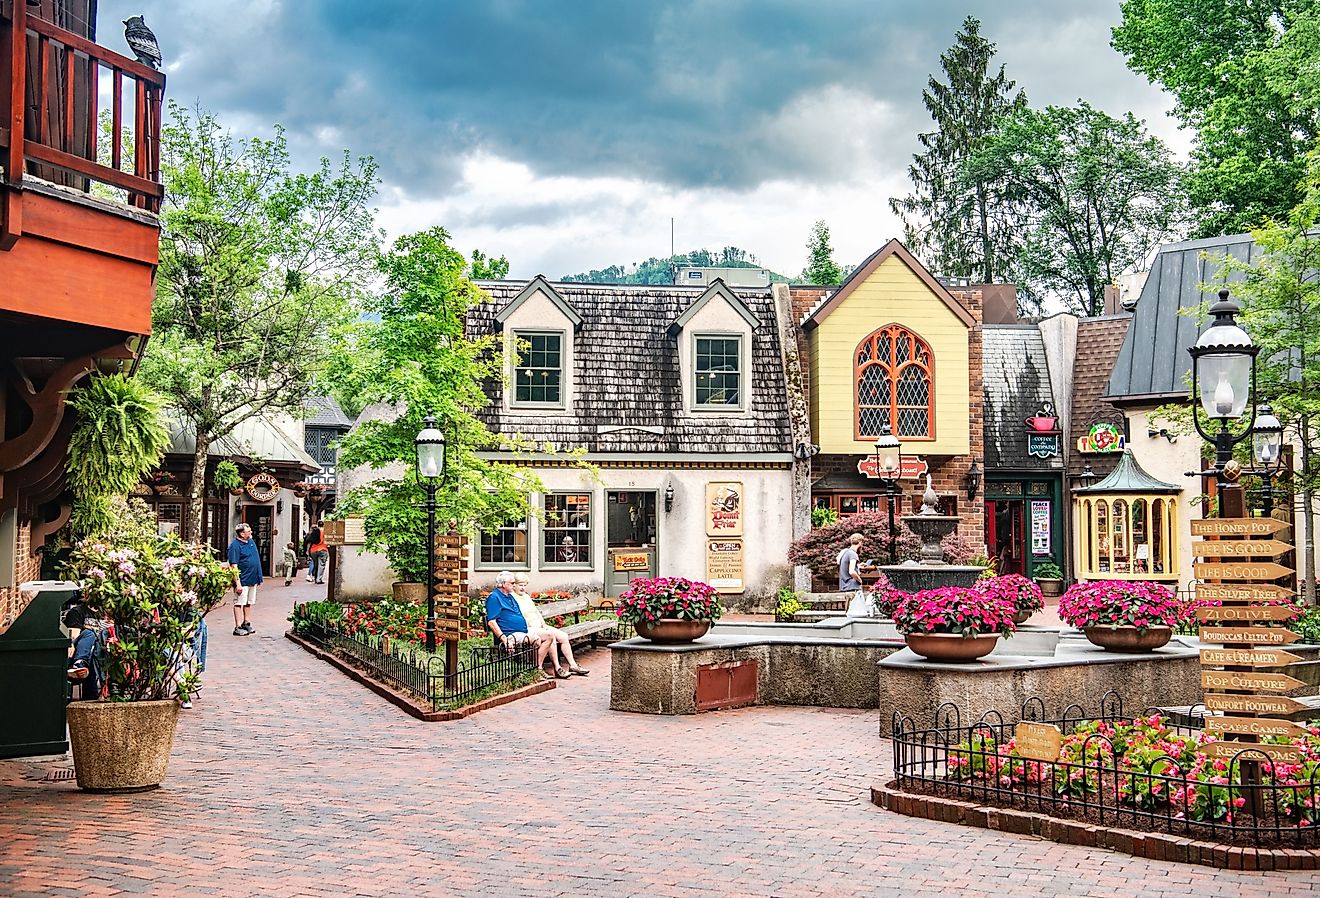 Quaint area of the lovely Gatlinburg, Tennessee with people sitting on a bench. Image credit Kosoff via Shutterstock.